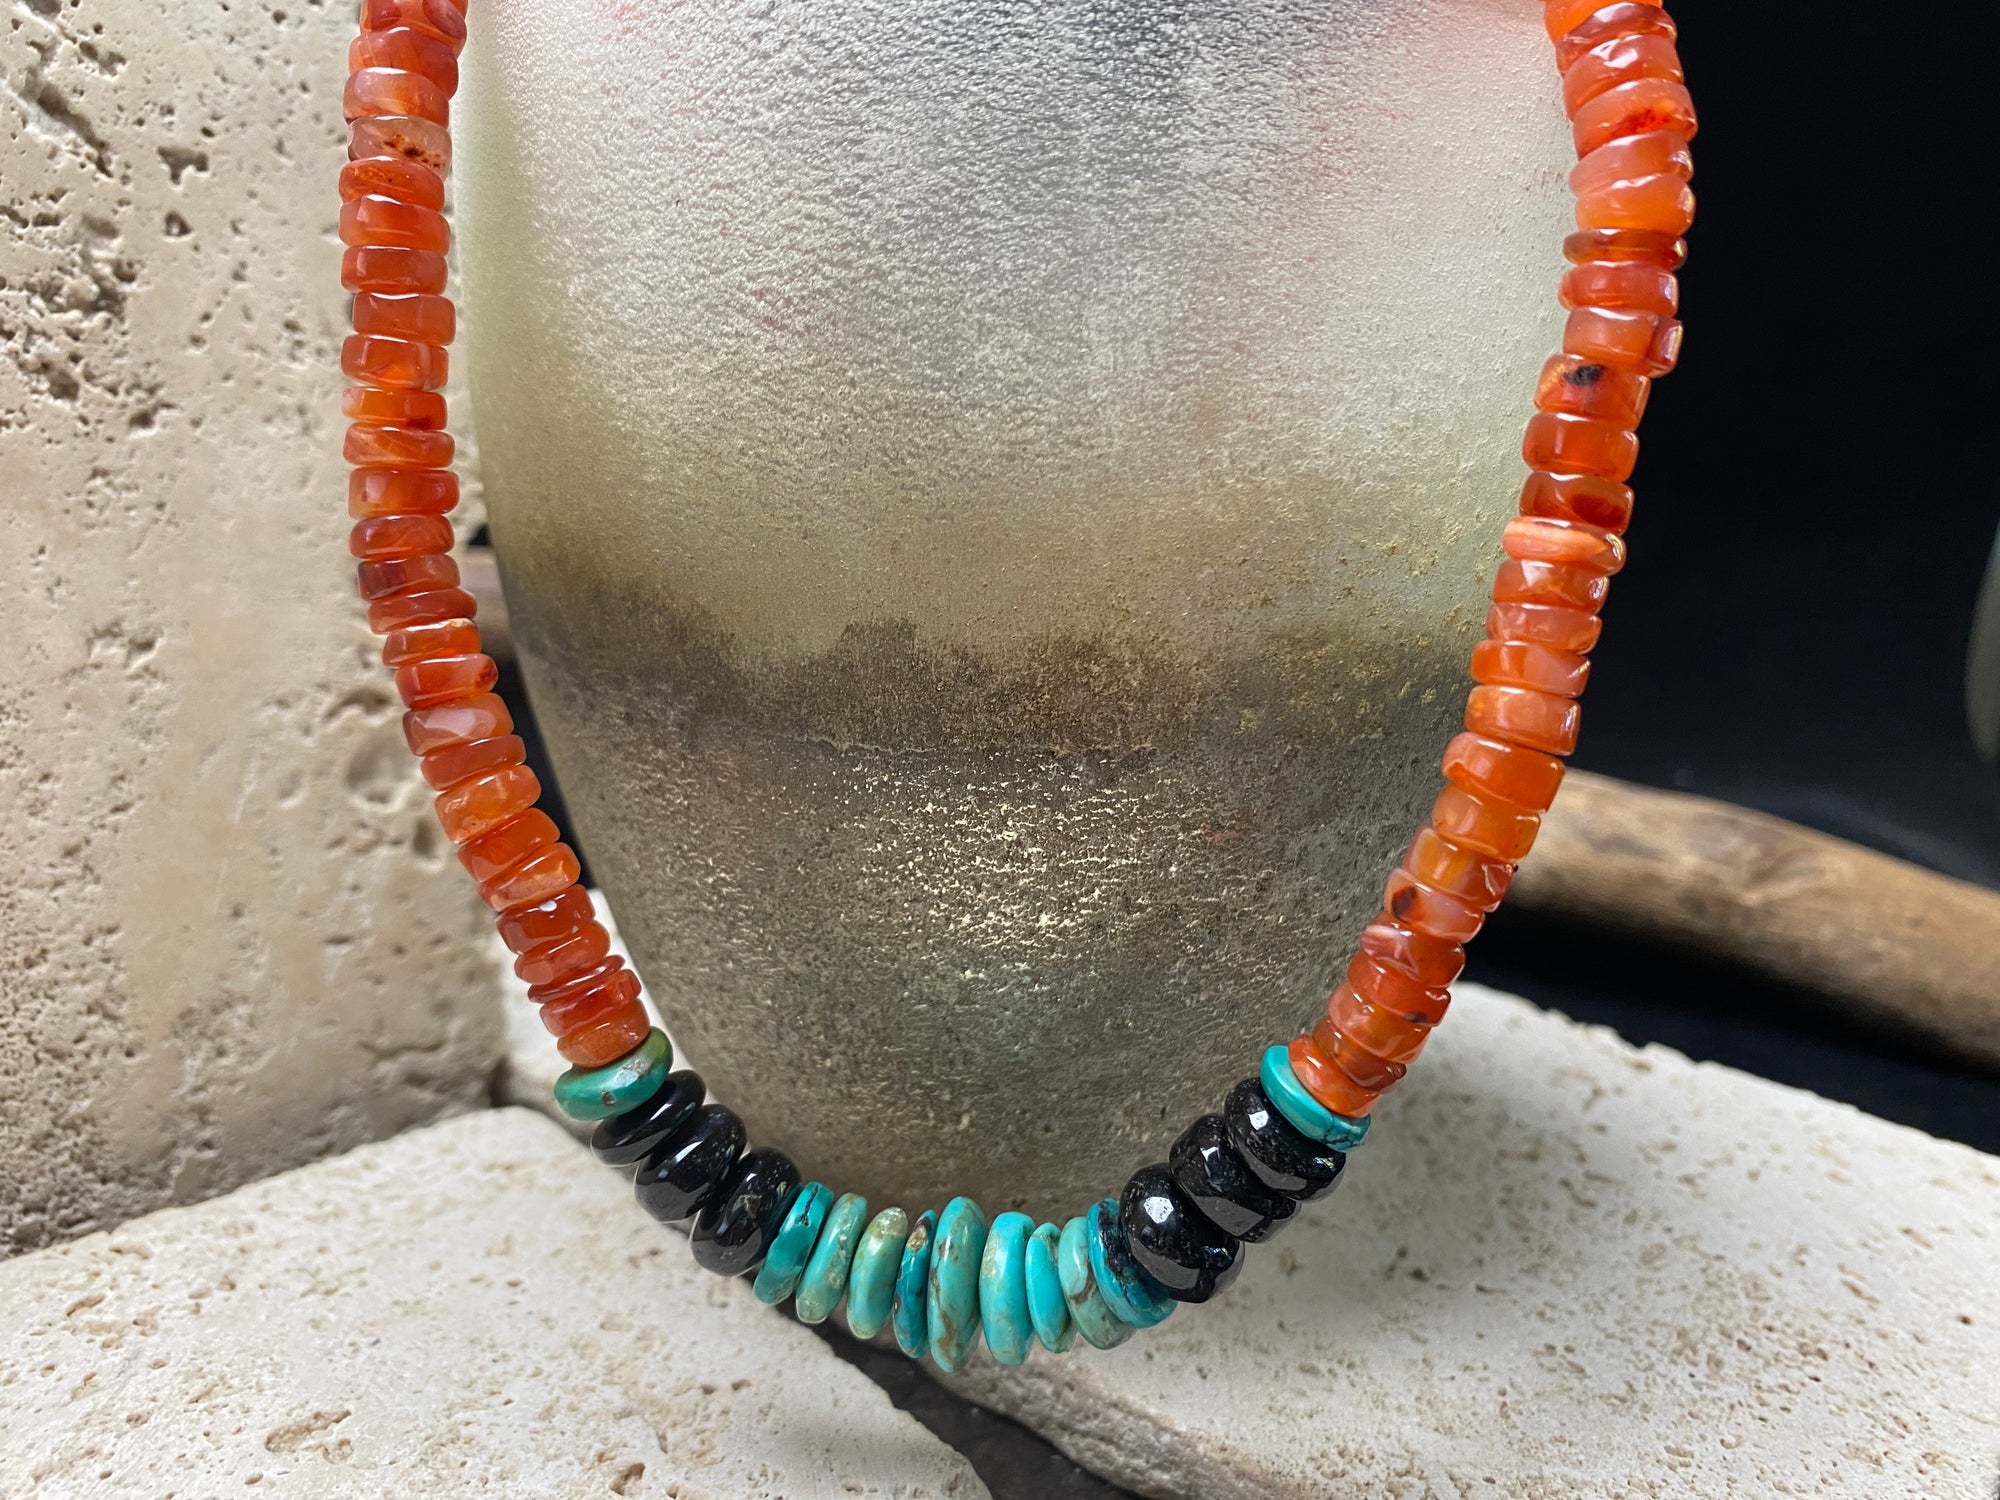 Chunky statement necklace with a southwest vibe, made from heshi cut carnelian beads, onyx and natural Arizona turquoise, finished with sterling silver beads and hook clasp. A one-off unisex necklace that will look stunning on a guy or girl. Measurements: 53 cm (21")